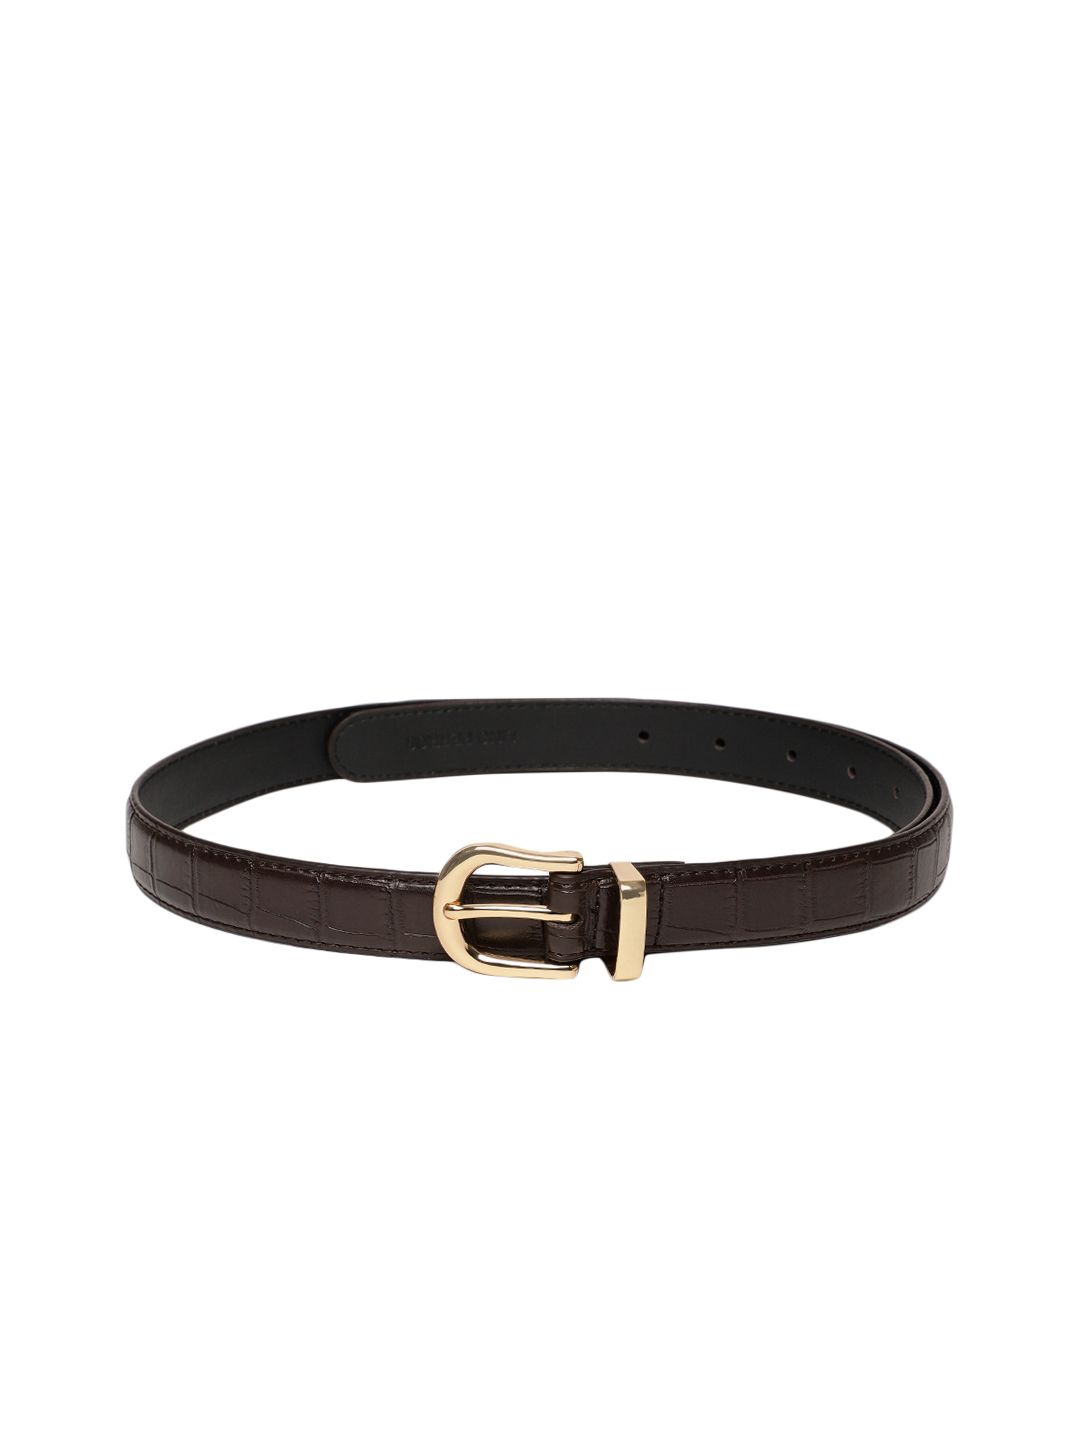 Lino Perros Women Coffee Brown Textured Belt Price in India